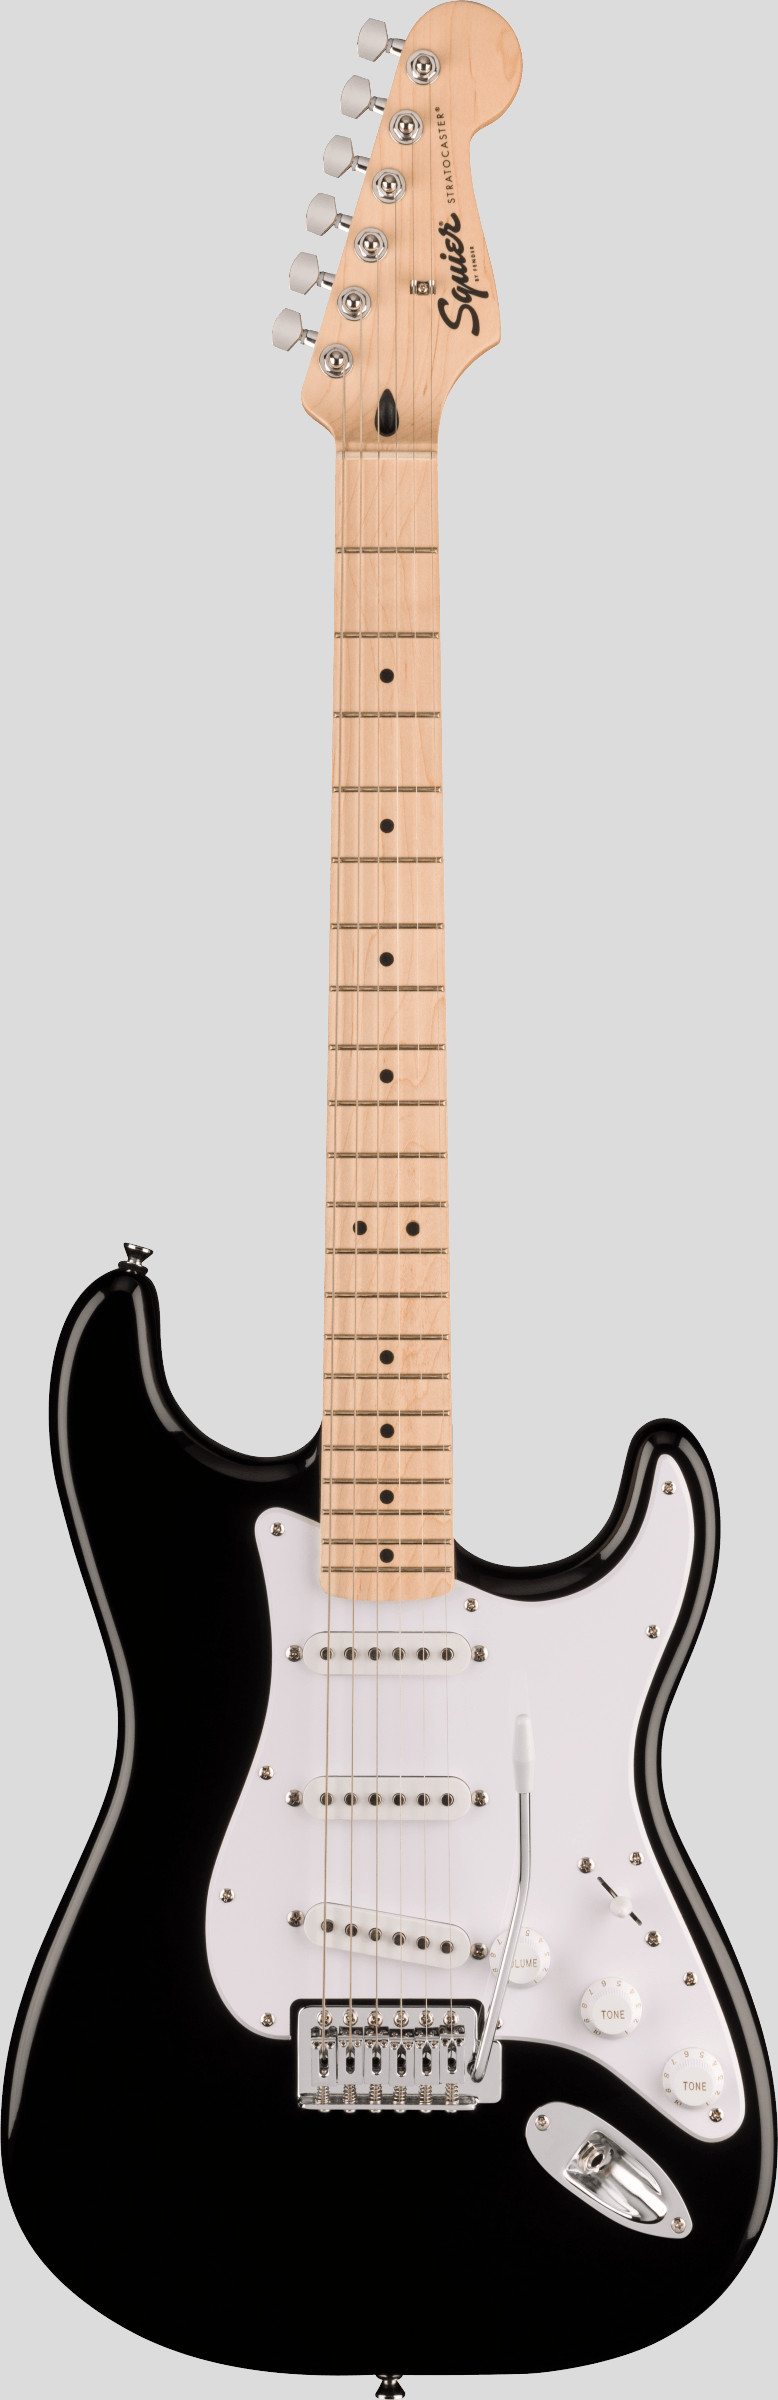 Squier by Fender Sonic Stratocaster Black 1